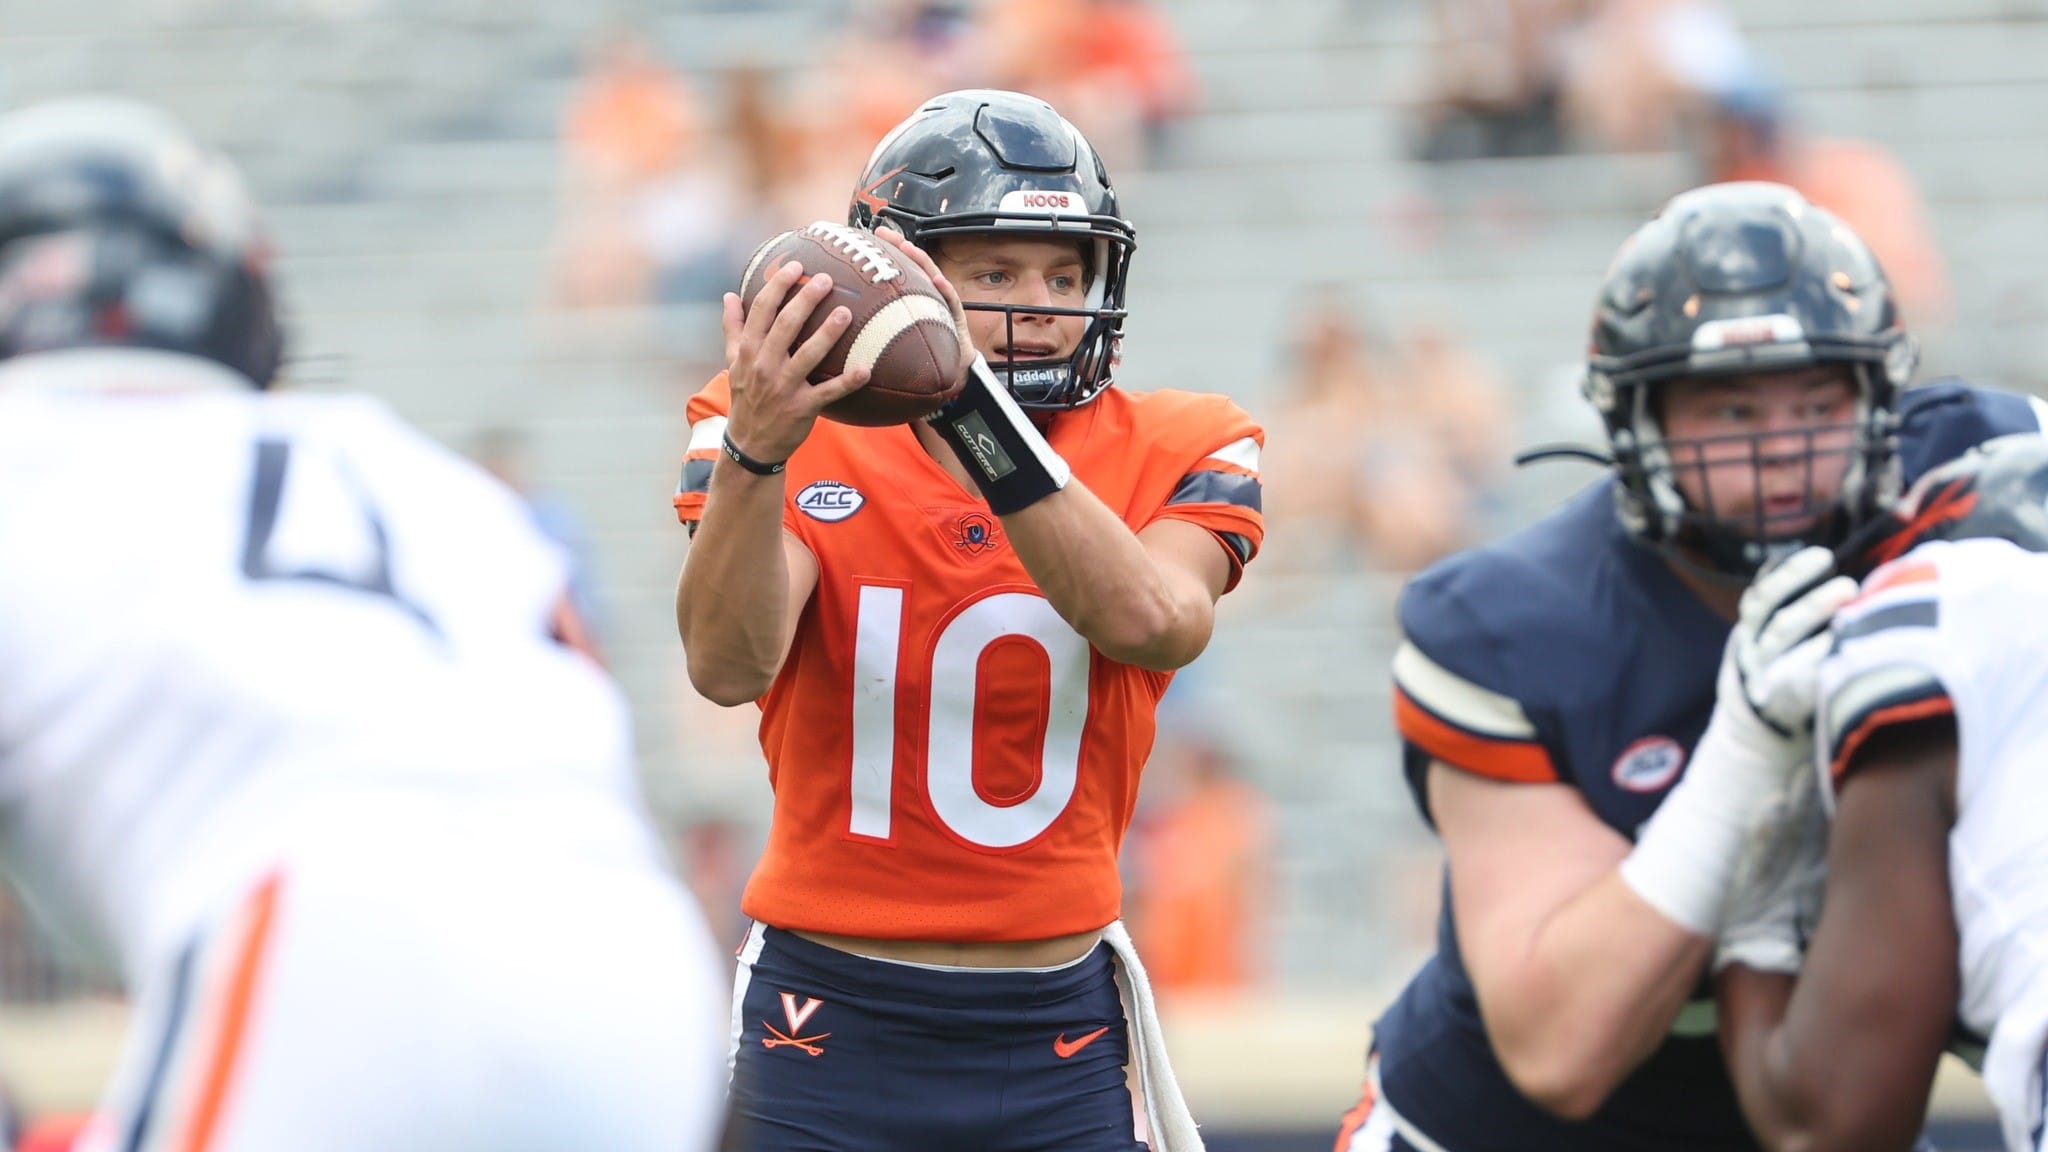 What to Watch For in the Virginia Football Blue-White Game on Saturday